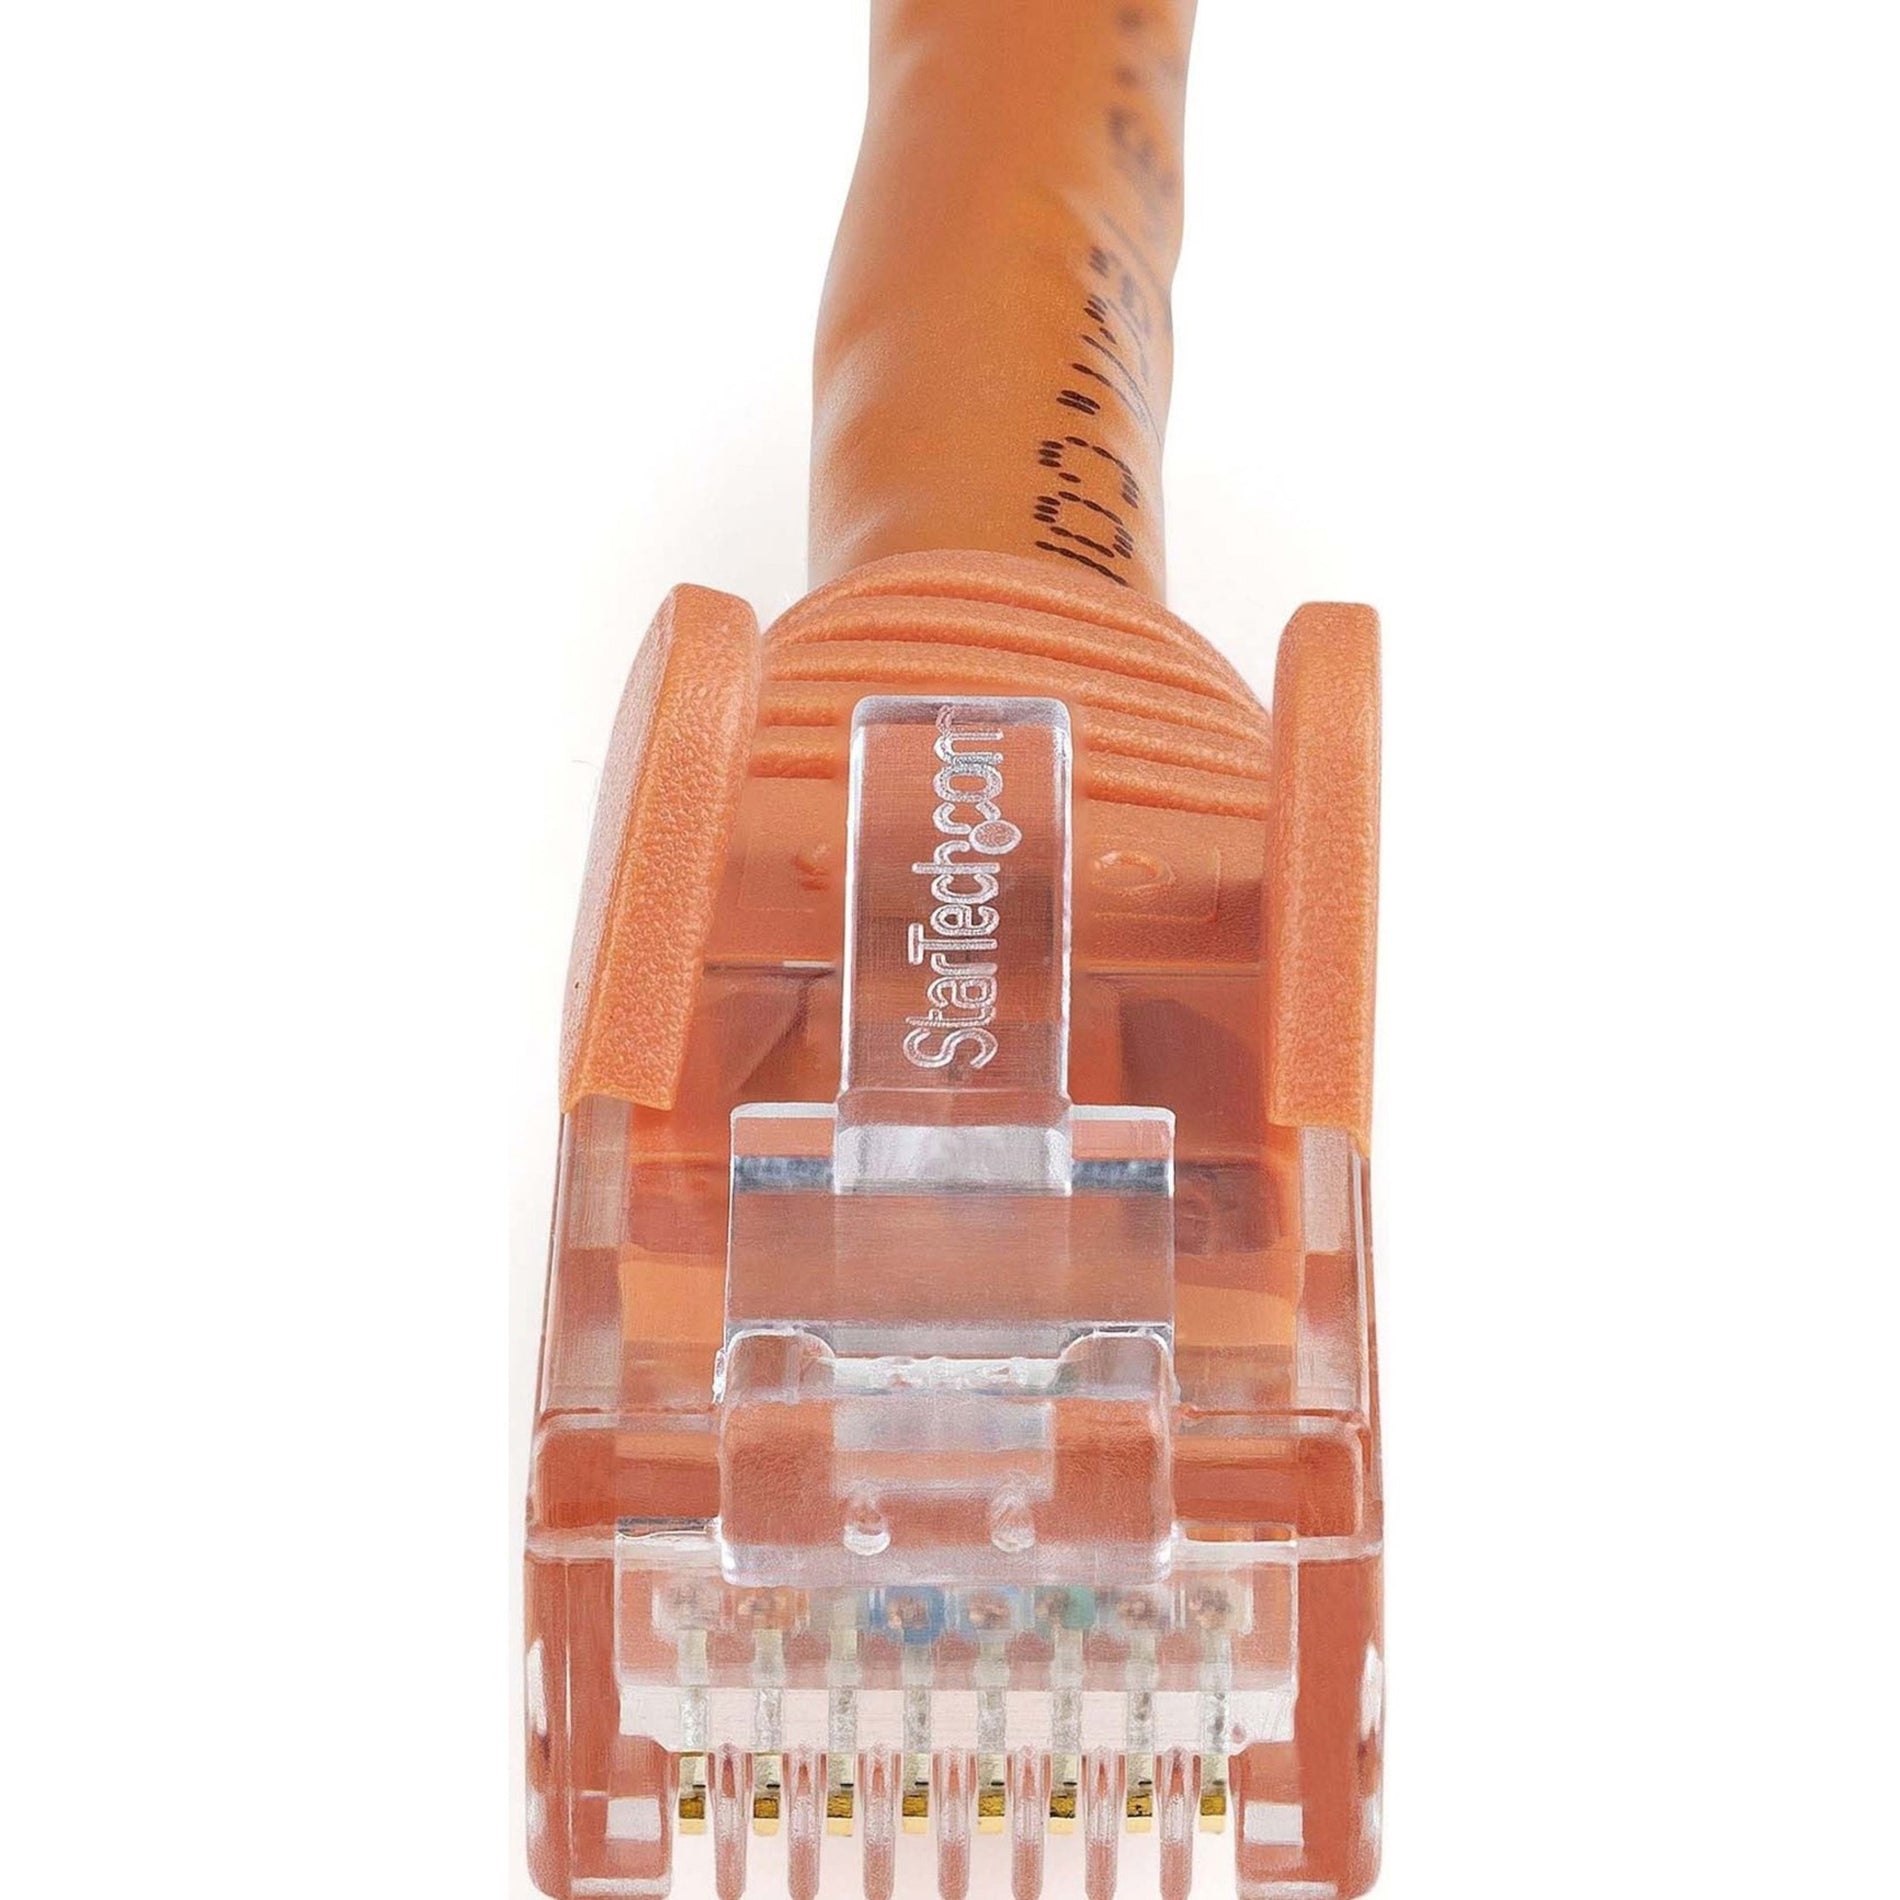 StarTech.com N6PATCH6INOR Cat.6 Patch Cable, 6in Orange, Short Ethernet Cable